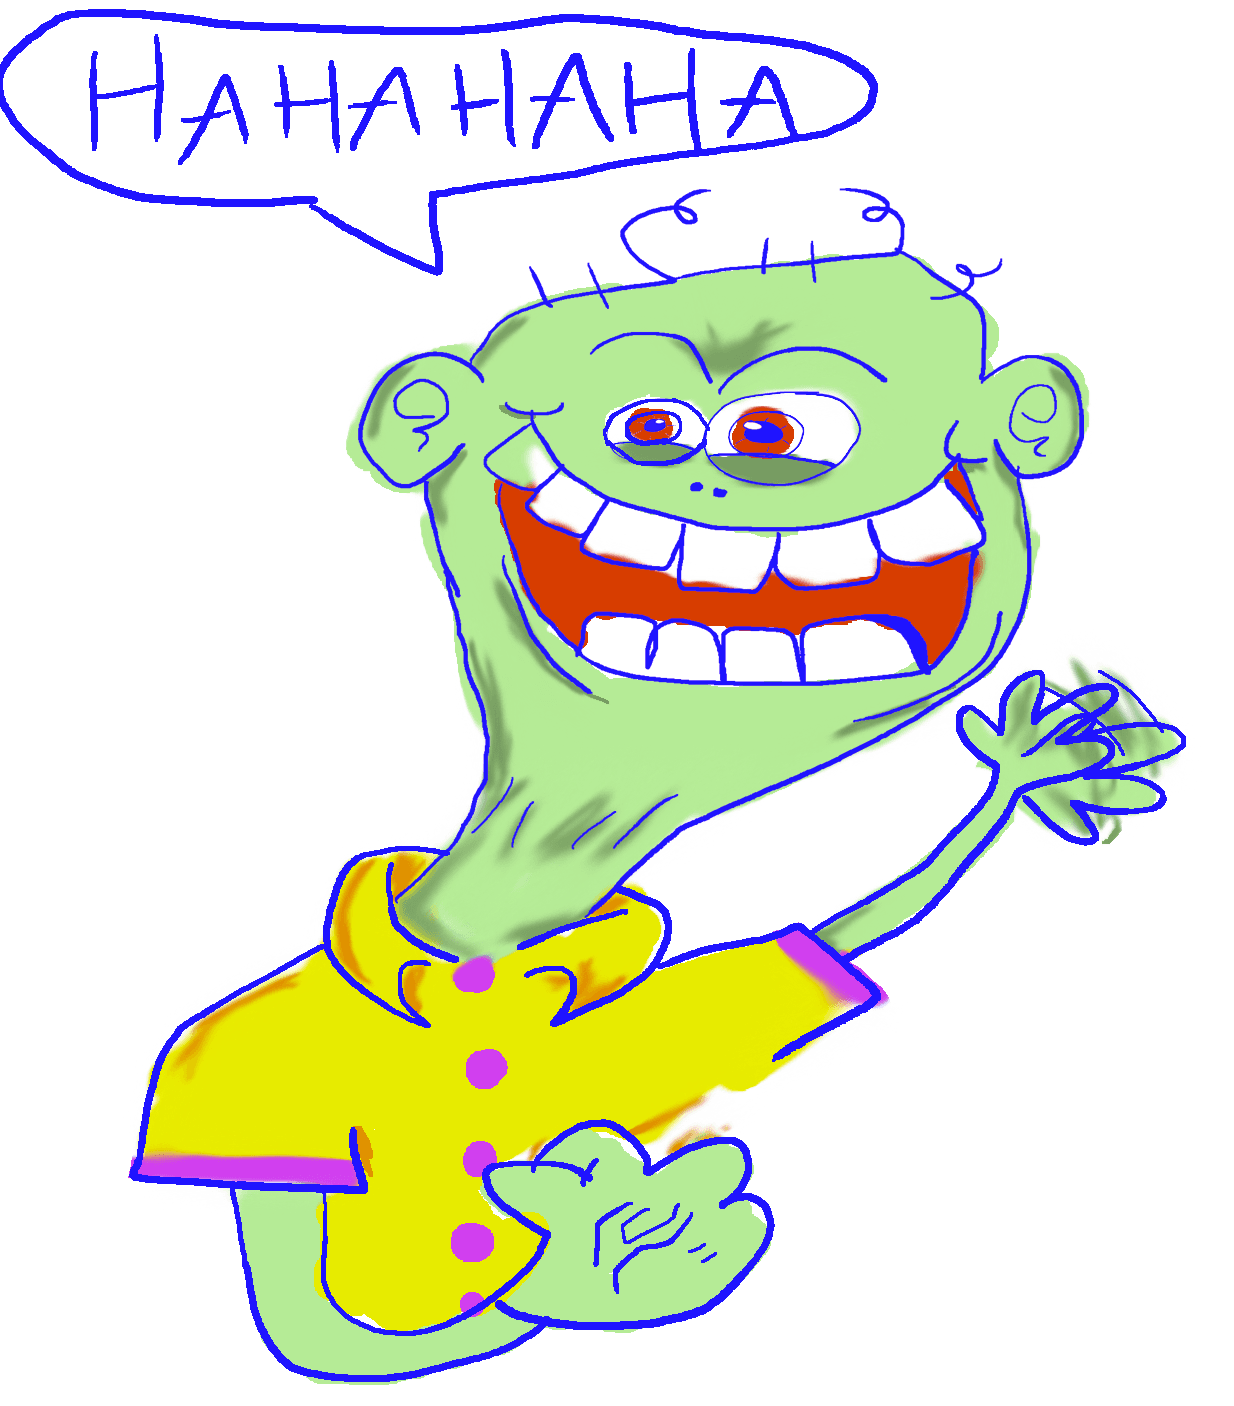 a character drawn by adlai abdelrazaq laughing maniacally